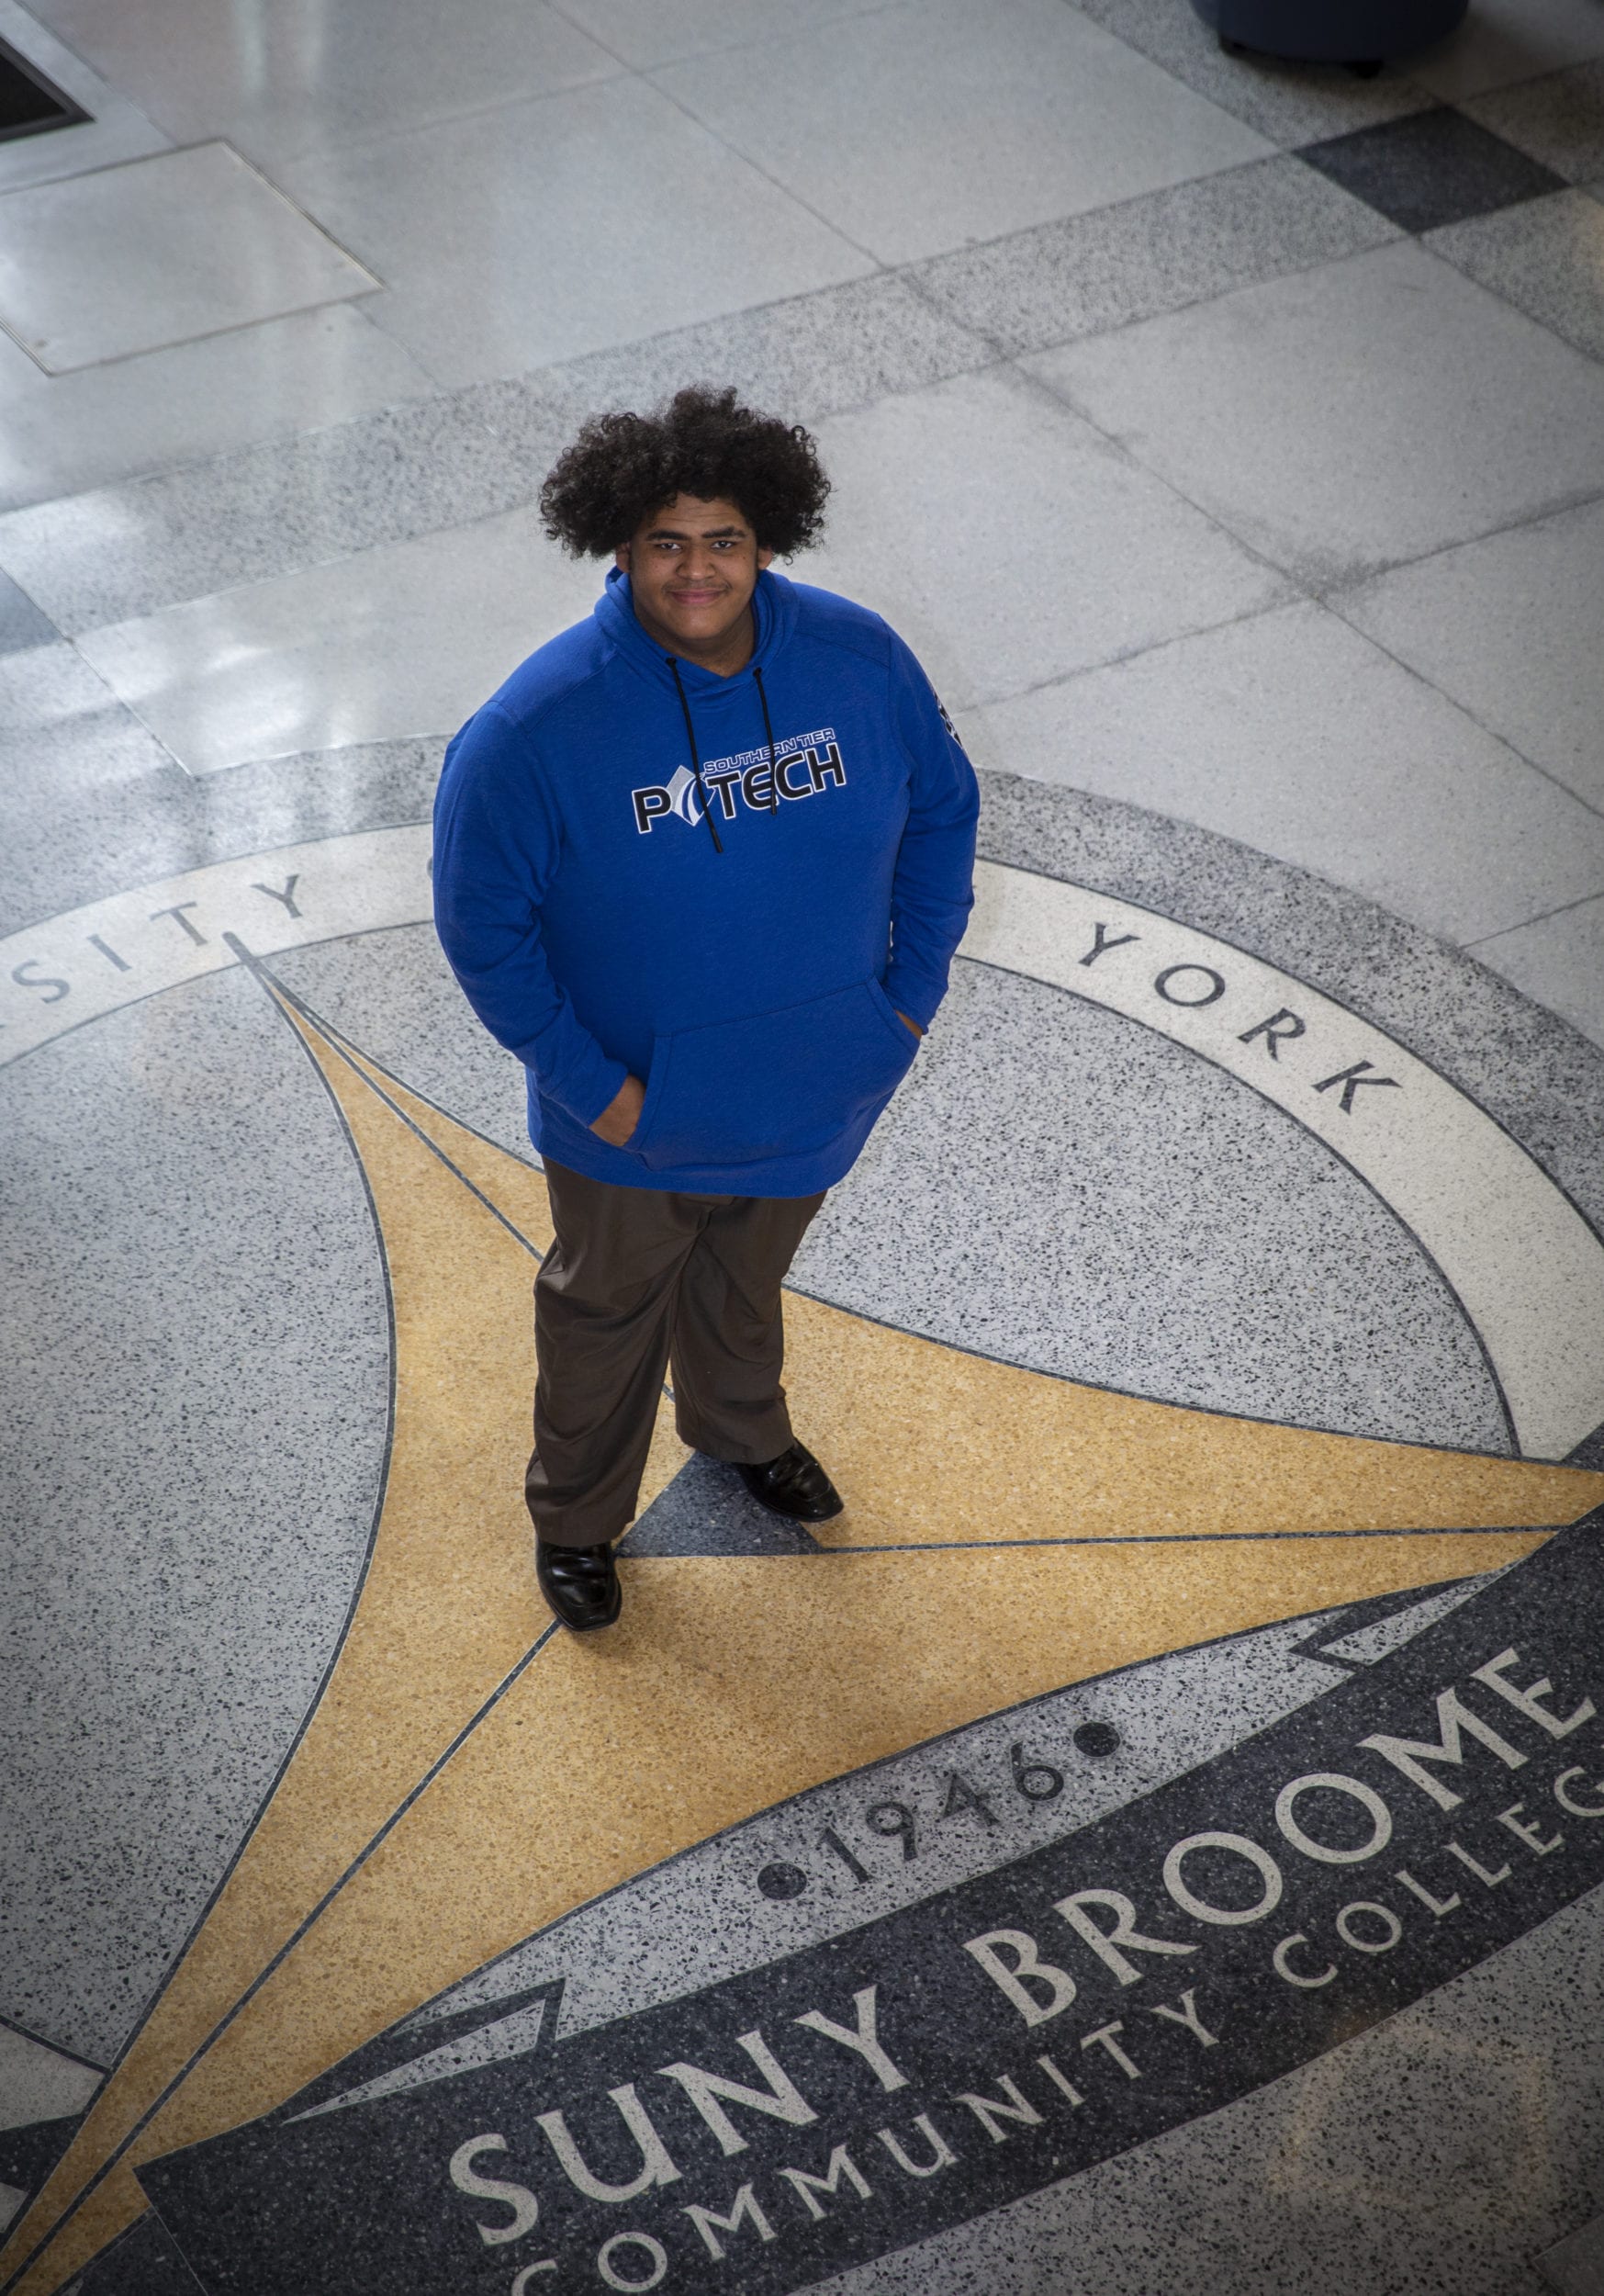 STEM Star: Clyde maps his future in computer science